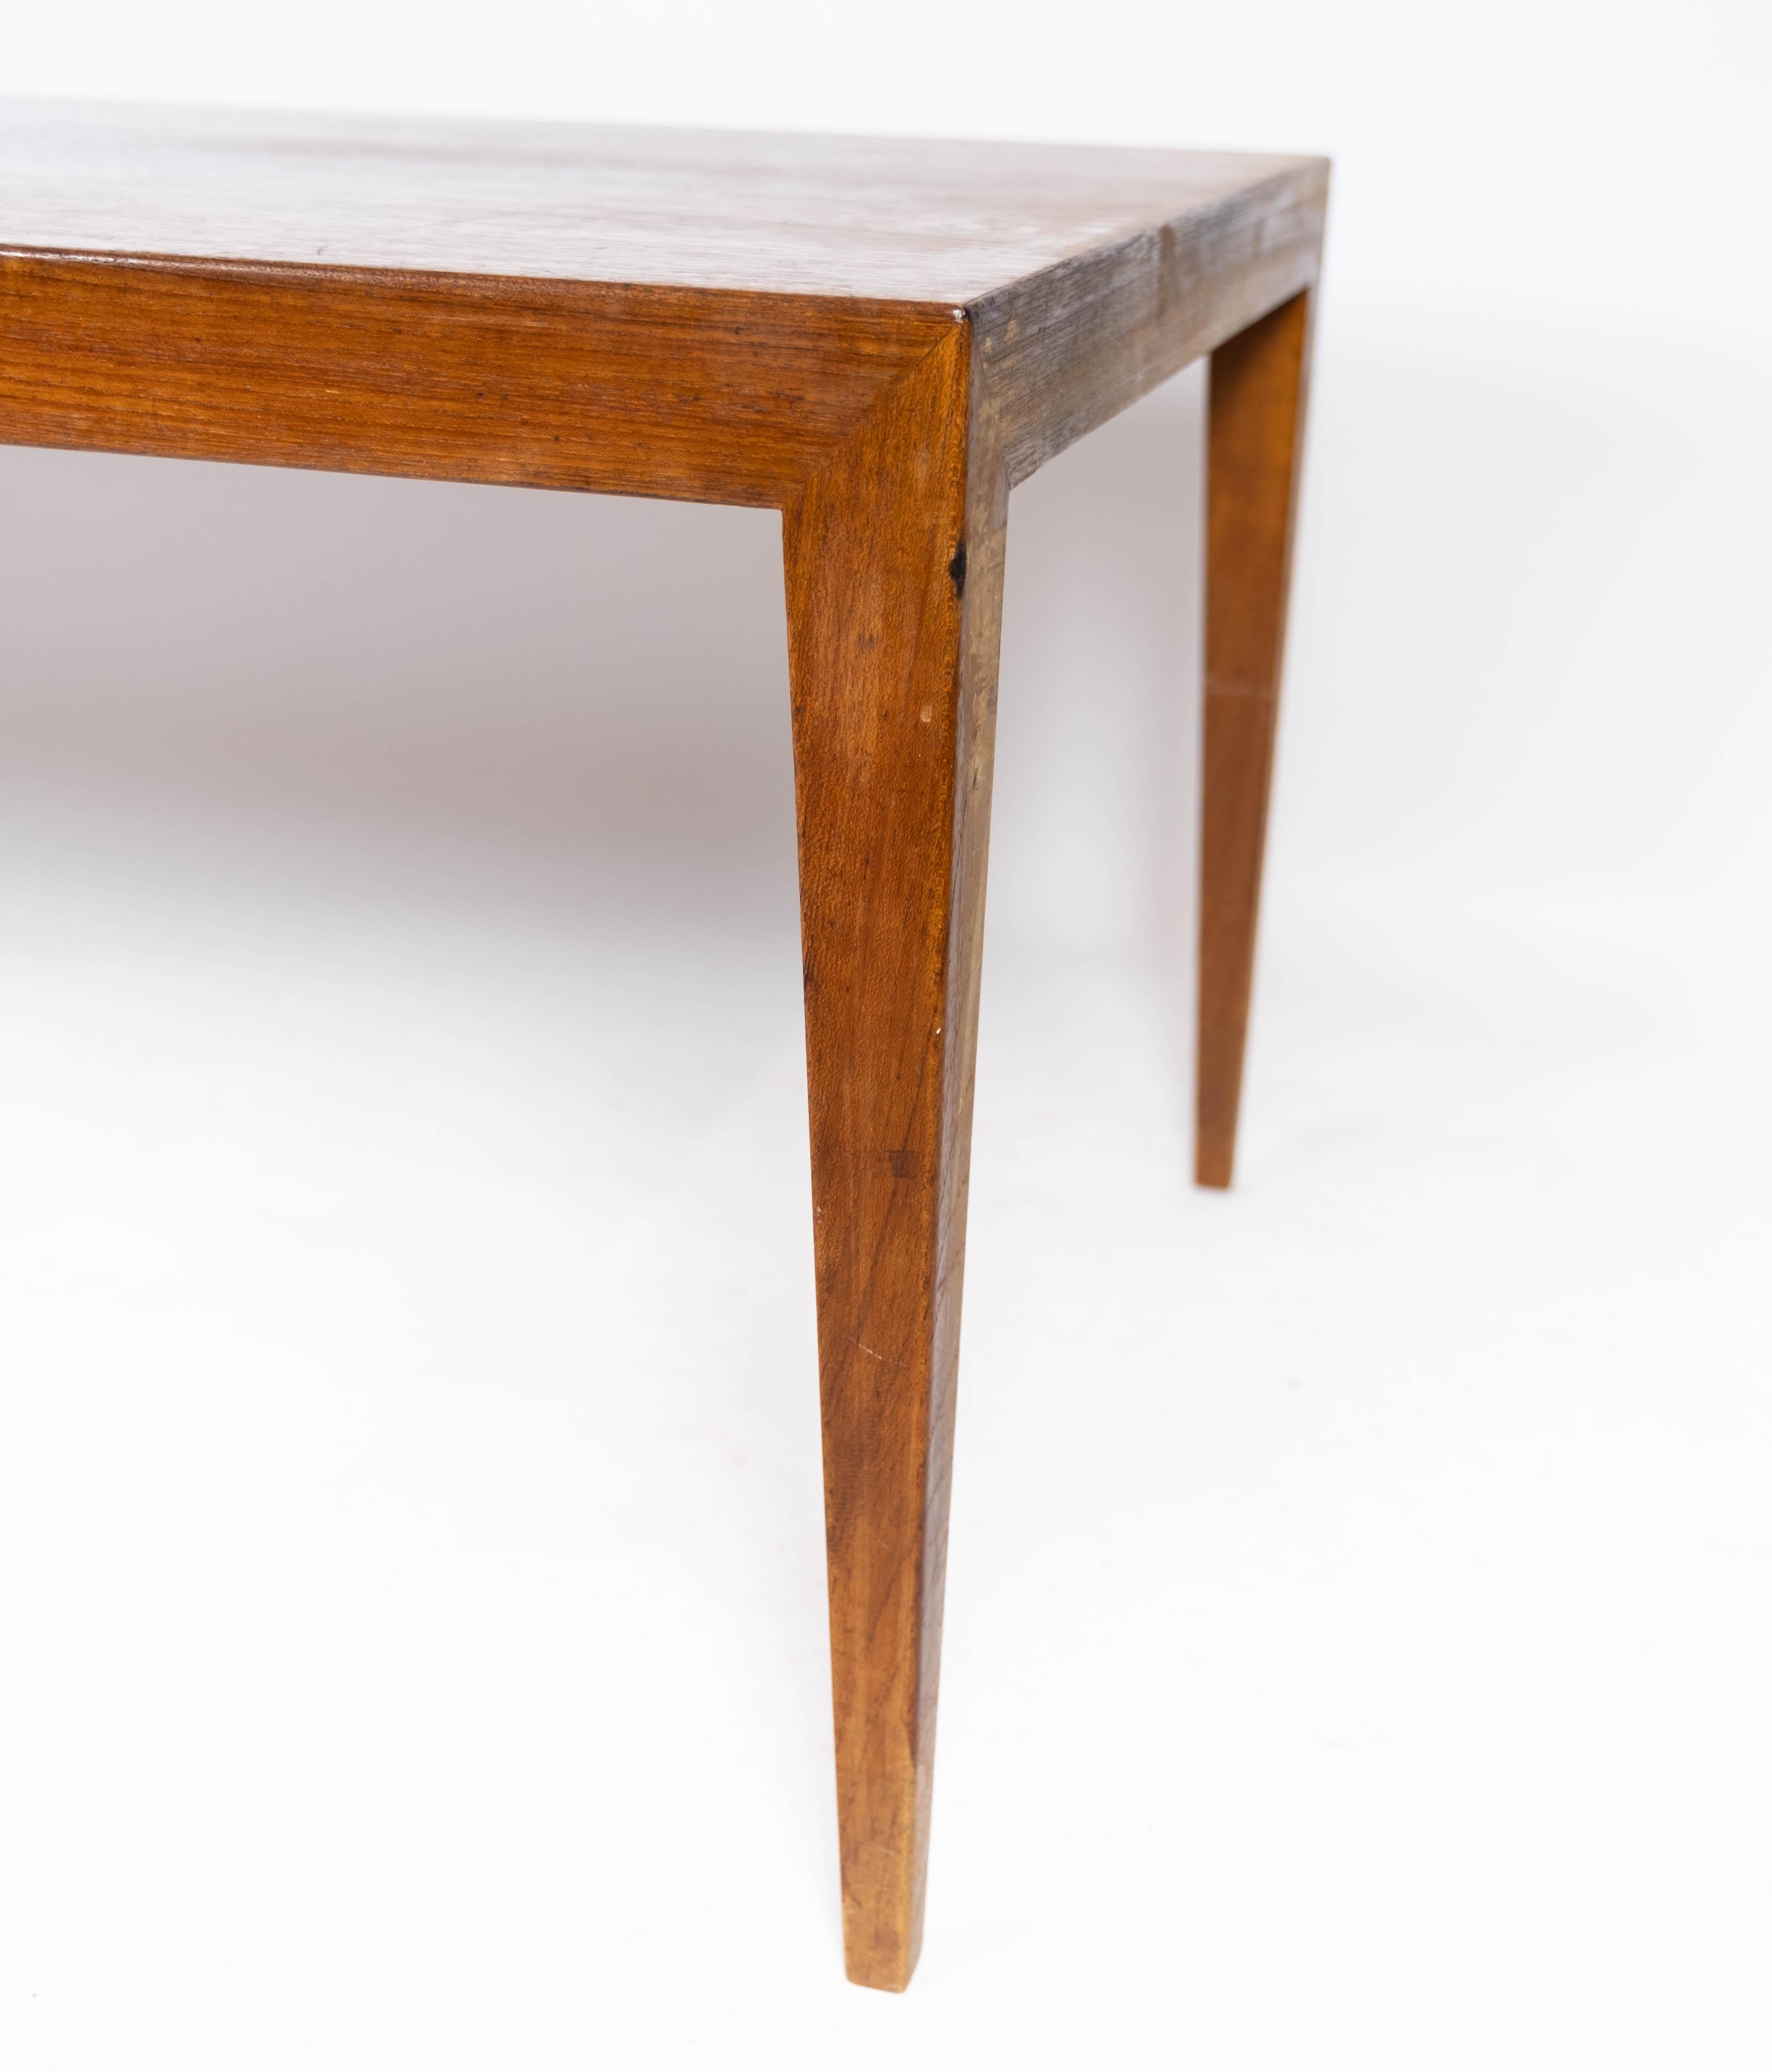 Mid-20th Century Coffee Table Made In Teak By Severin Hansen Made By Haslev Furniture From 1960s For Sale